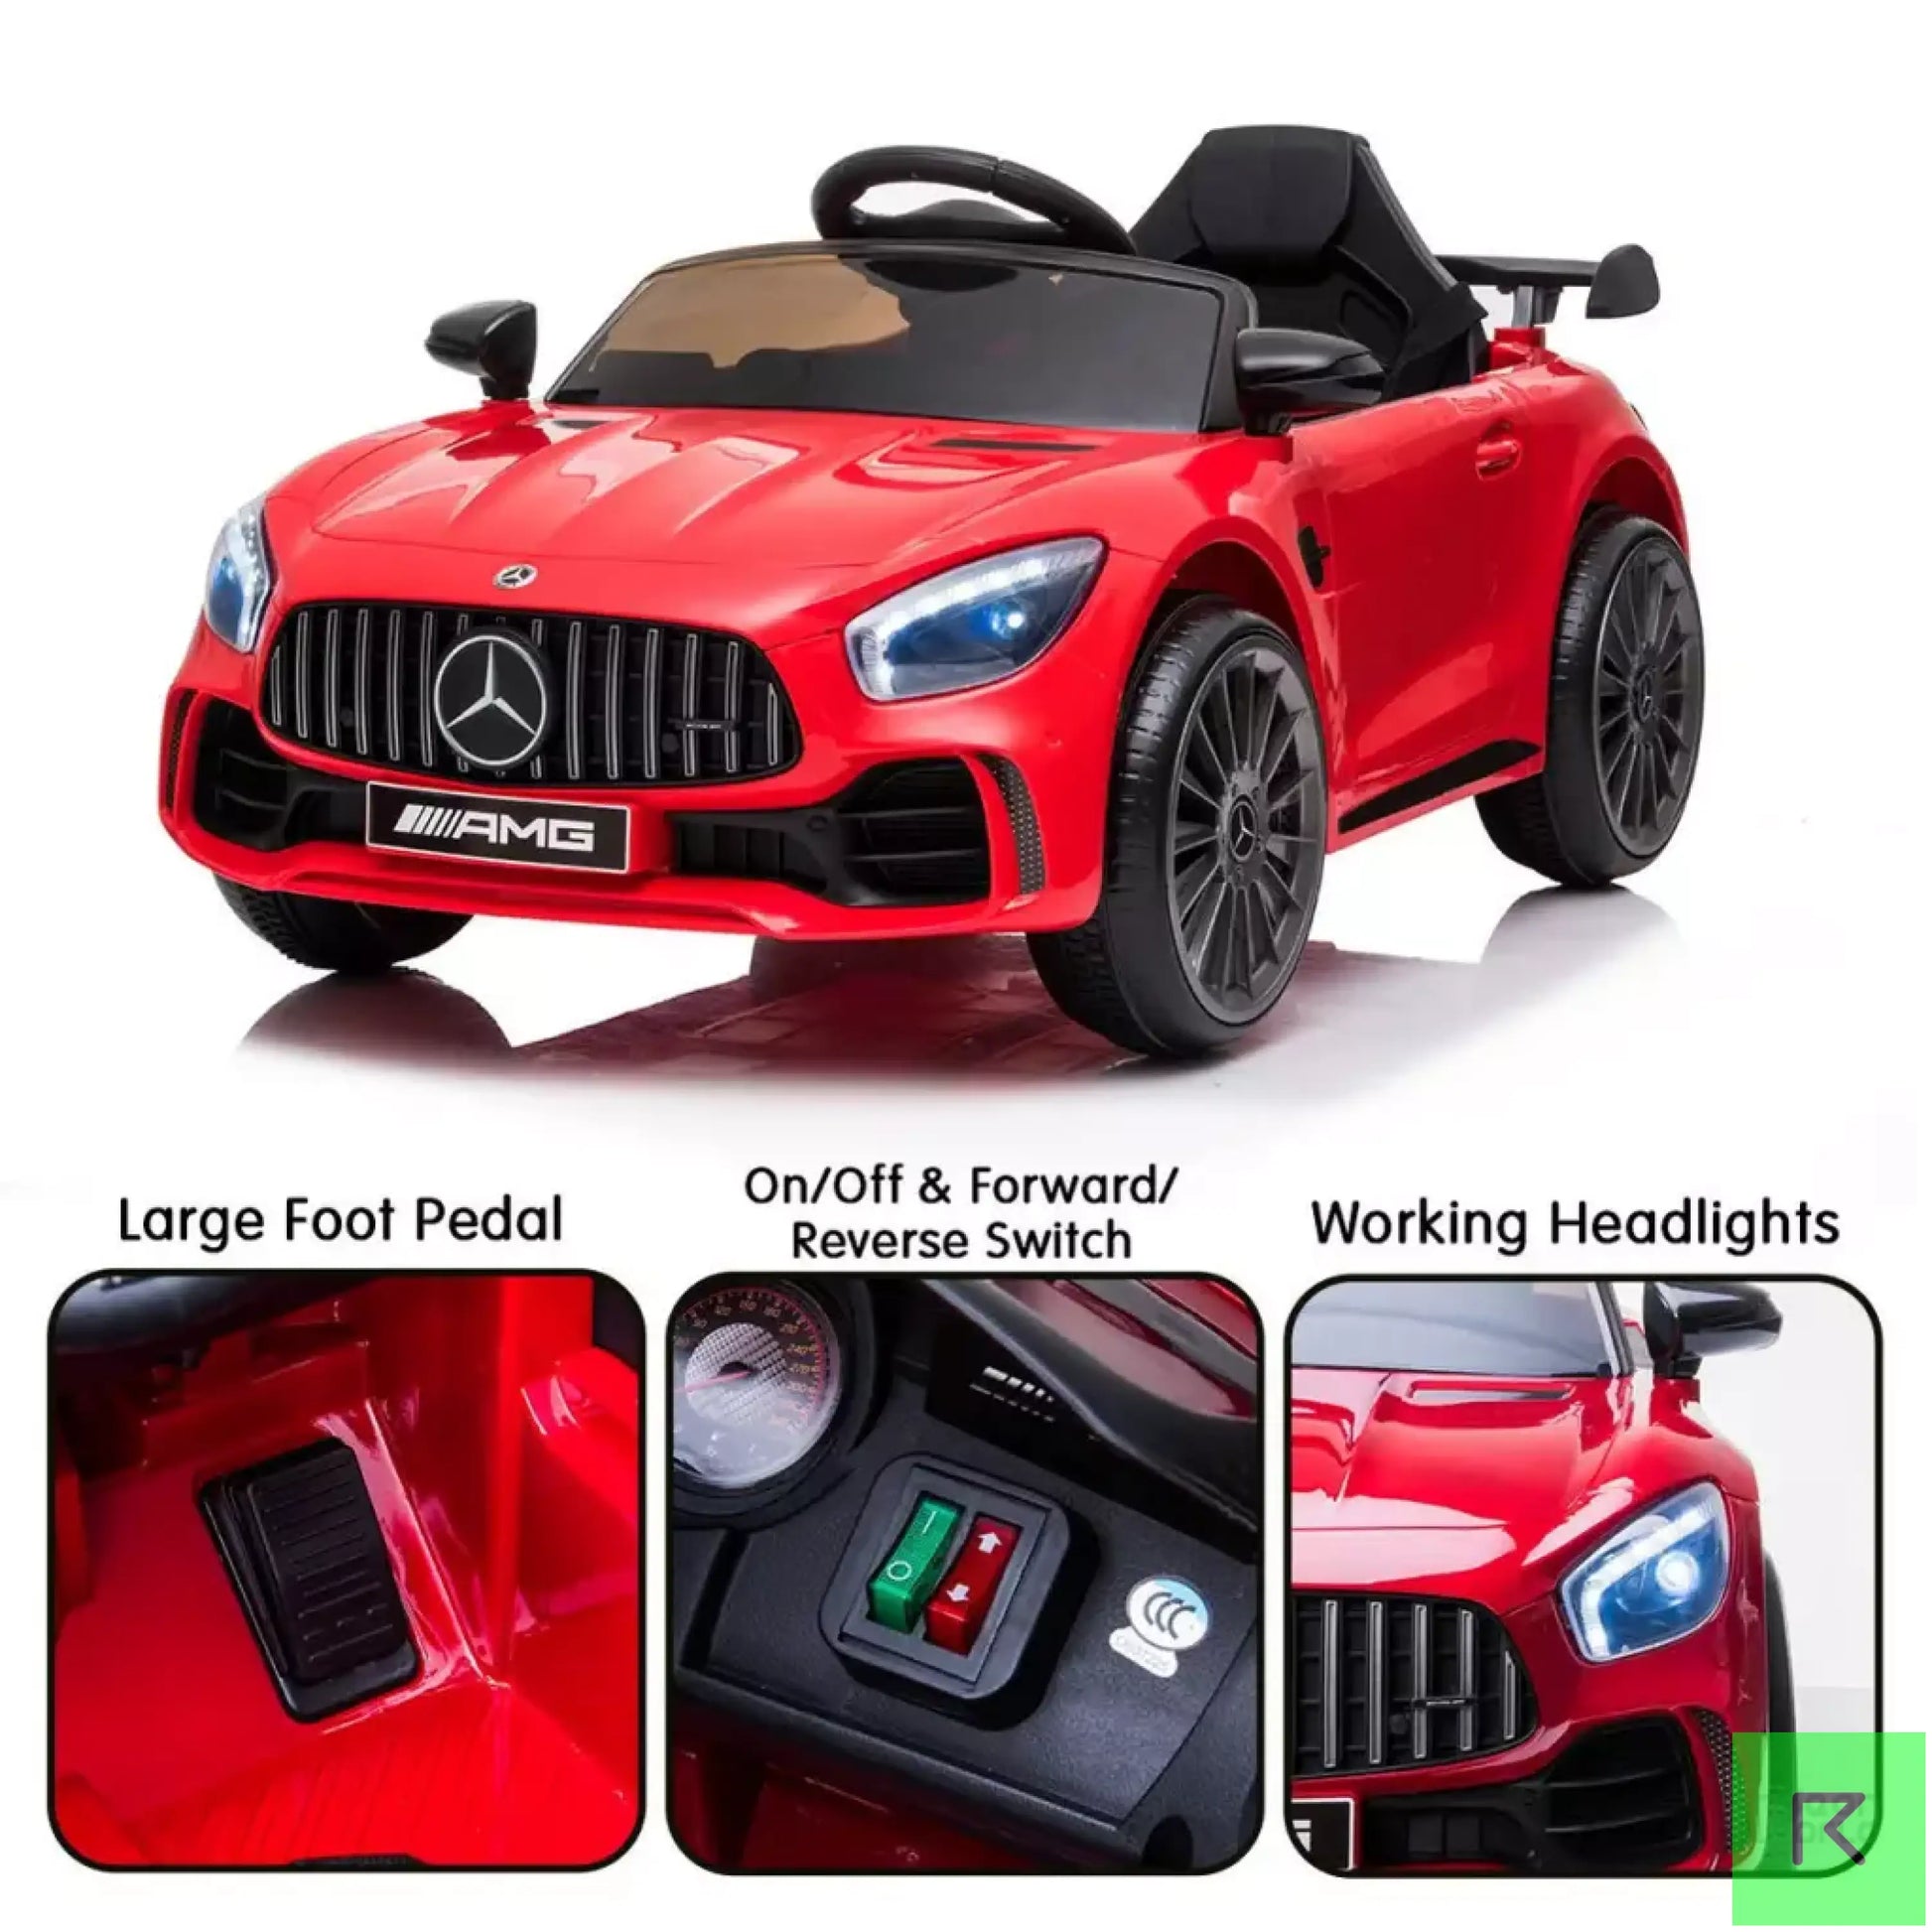 MERCEDES BENZ RED Licensed Kids Electric Ride On Car Remote Control - Red